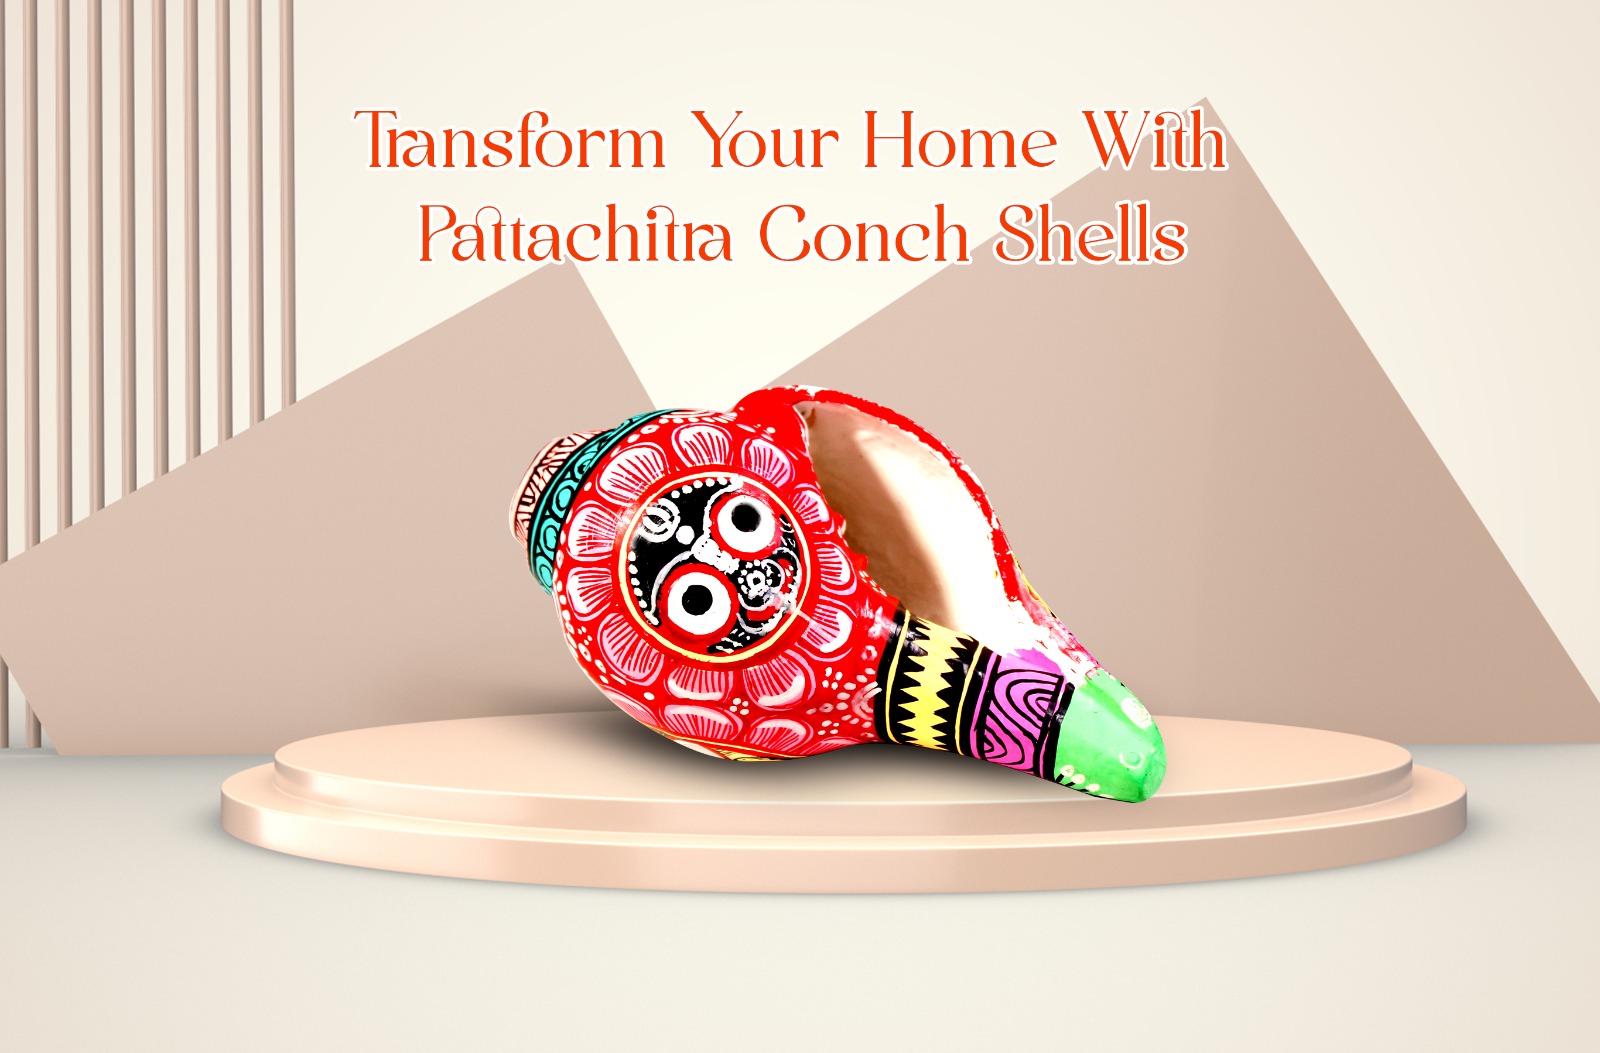 Transform Your Home with Hand-Painted Pattachitra Conch Shells